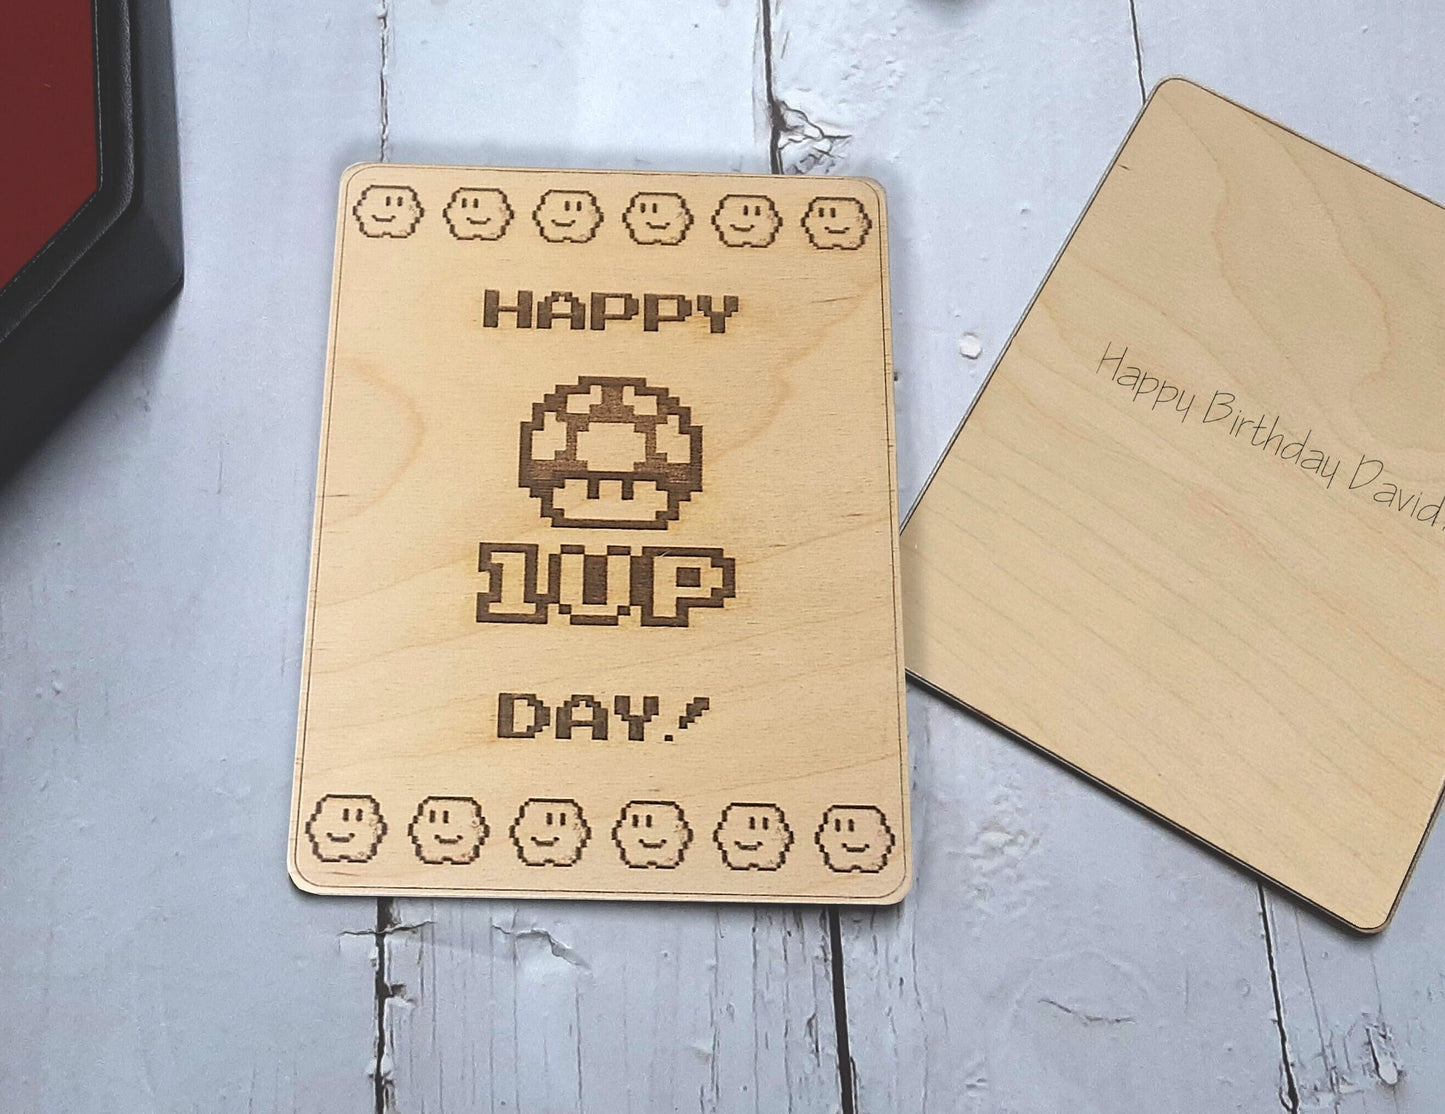 Happy 1UP day! - Birthday Card - Video Game Birthday Card, engraved wood, Console Gamer Gift,  8-bit Pixel Art Games